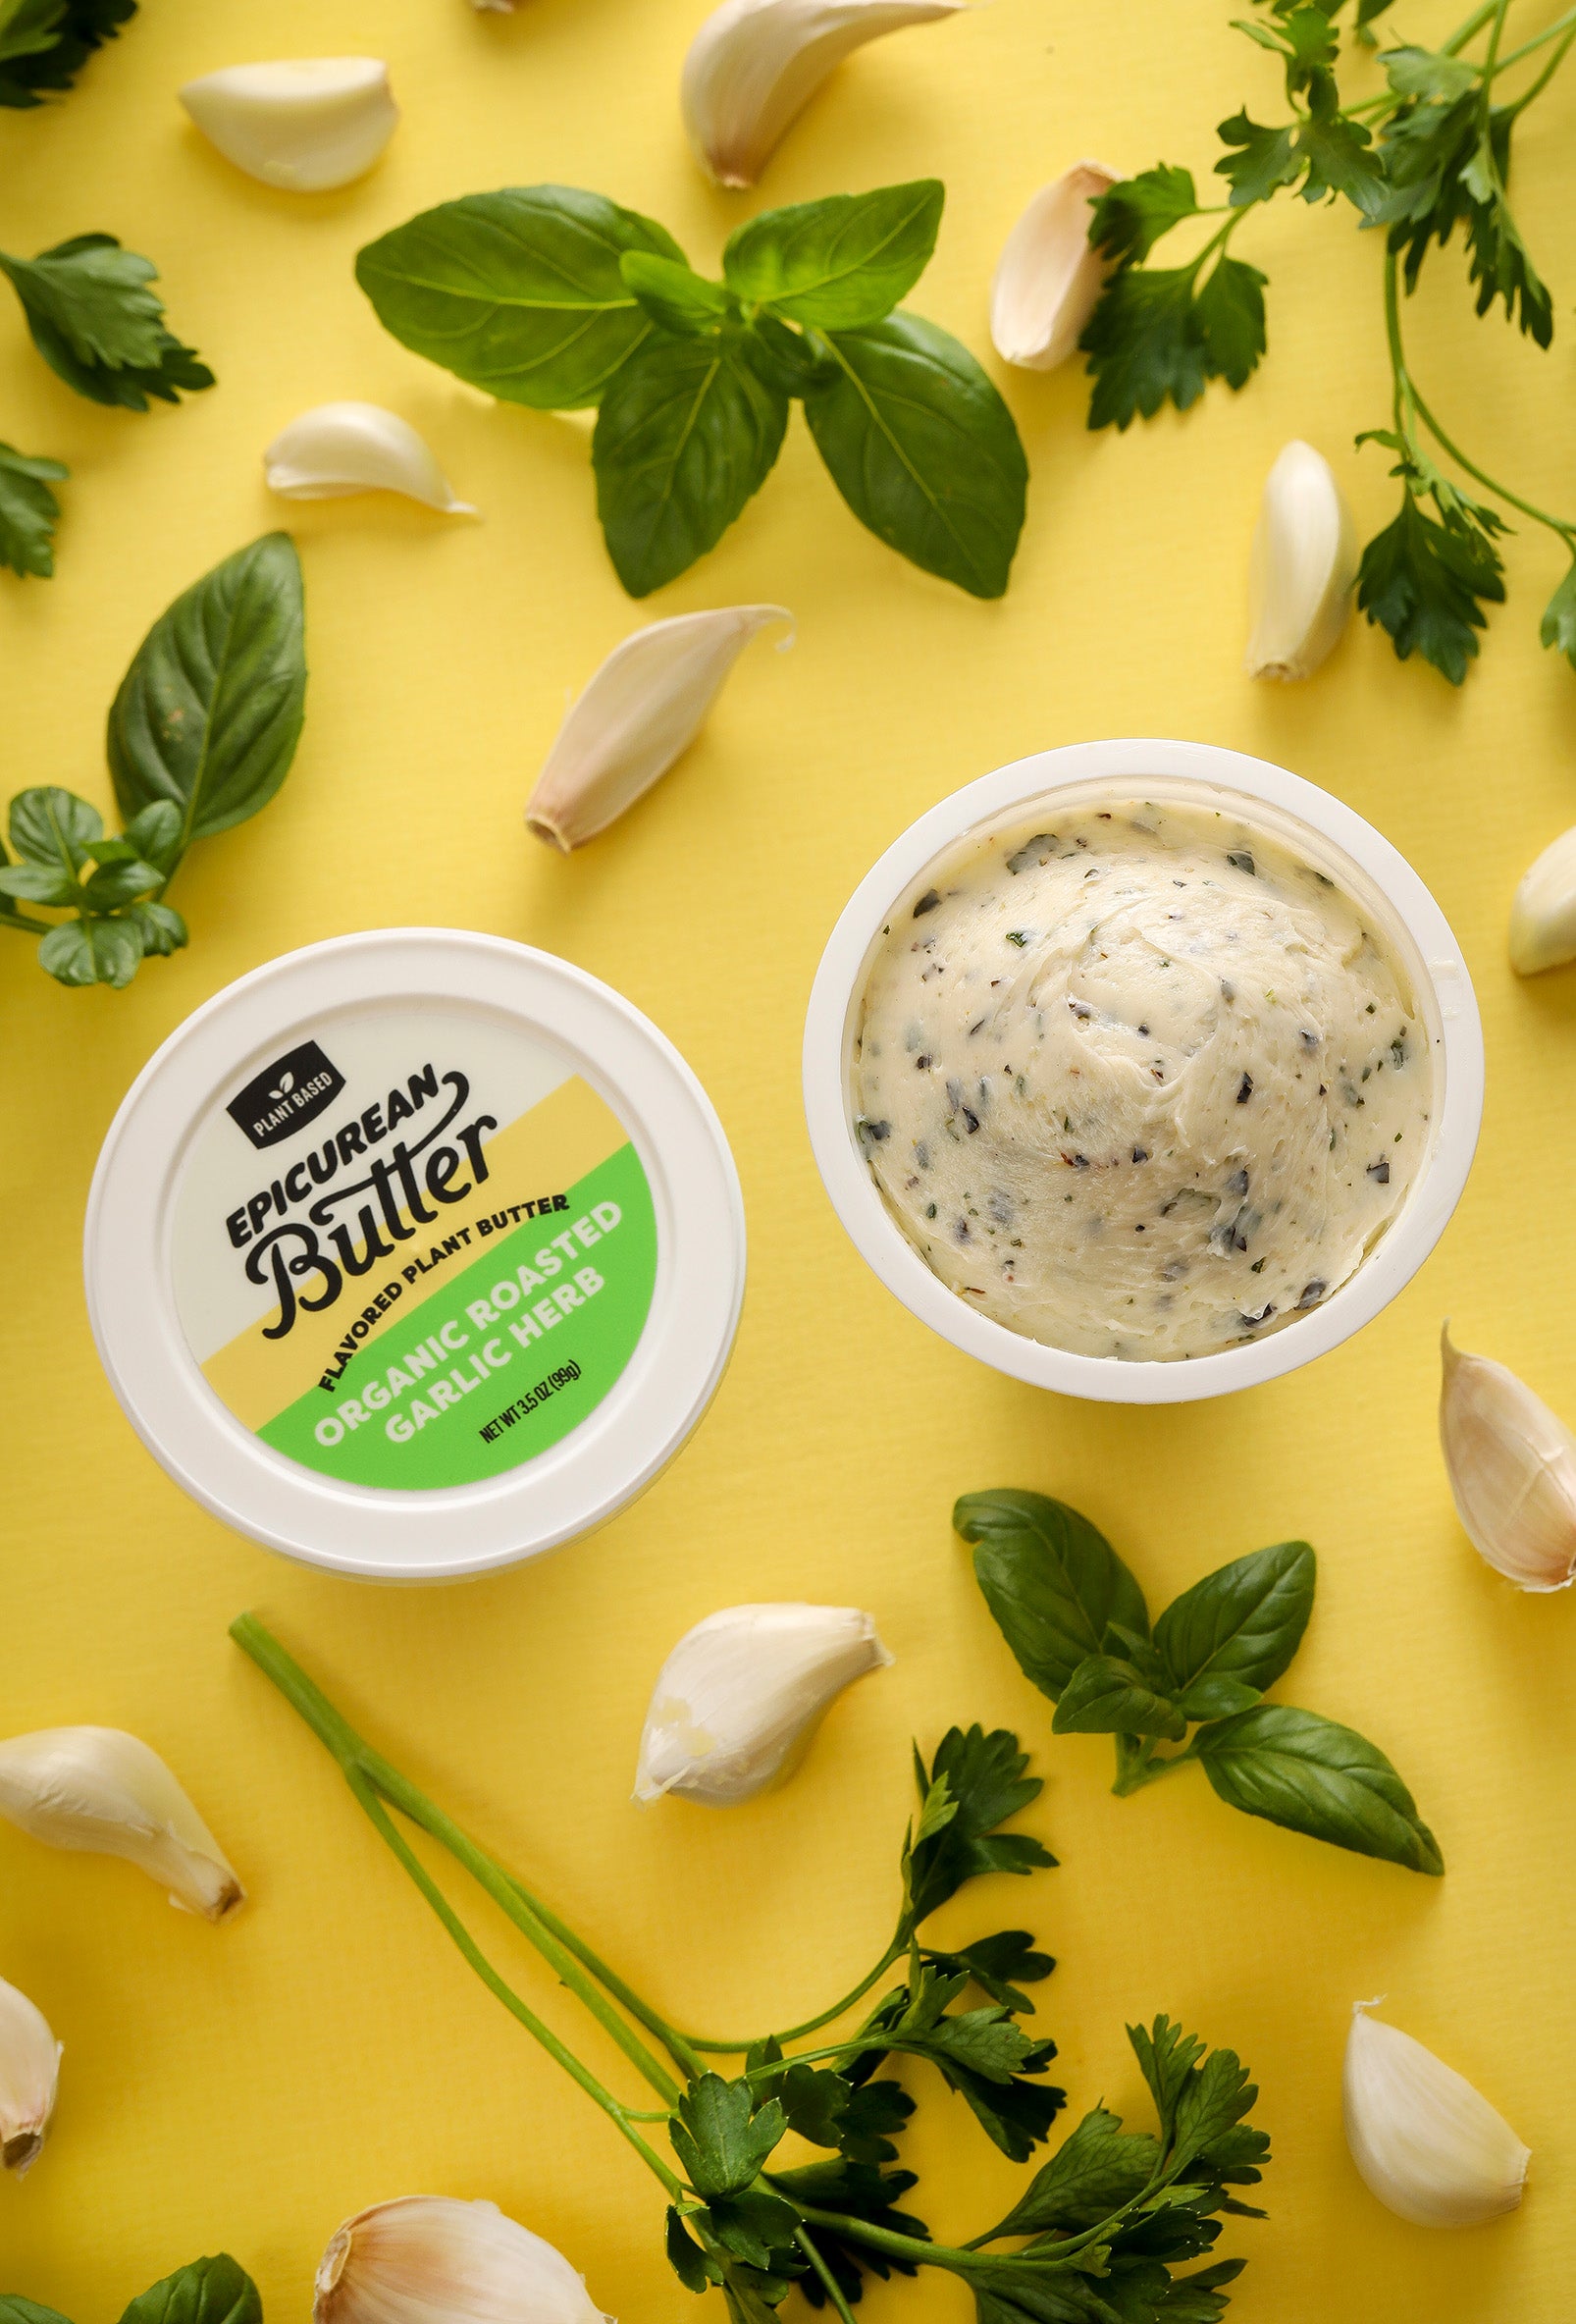 Organic Roasted Garlic Herb Flavored Plant Butter tub with ingredients